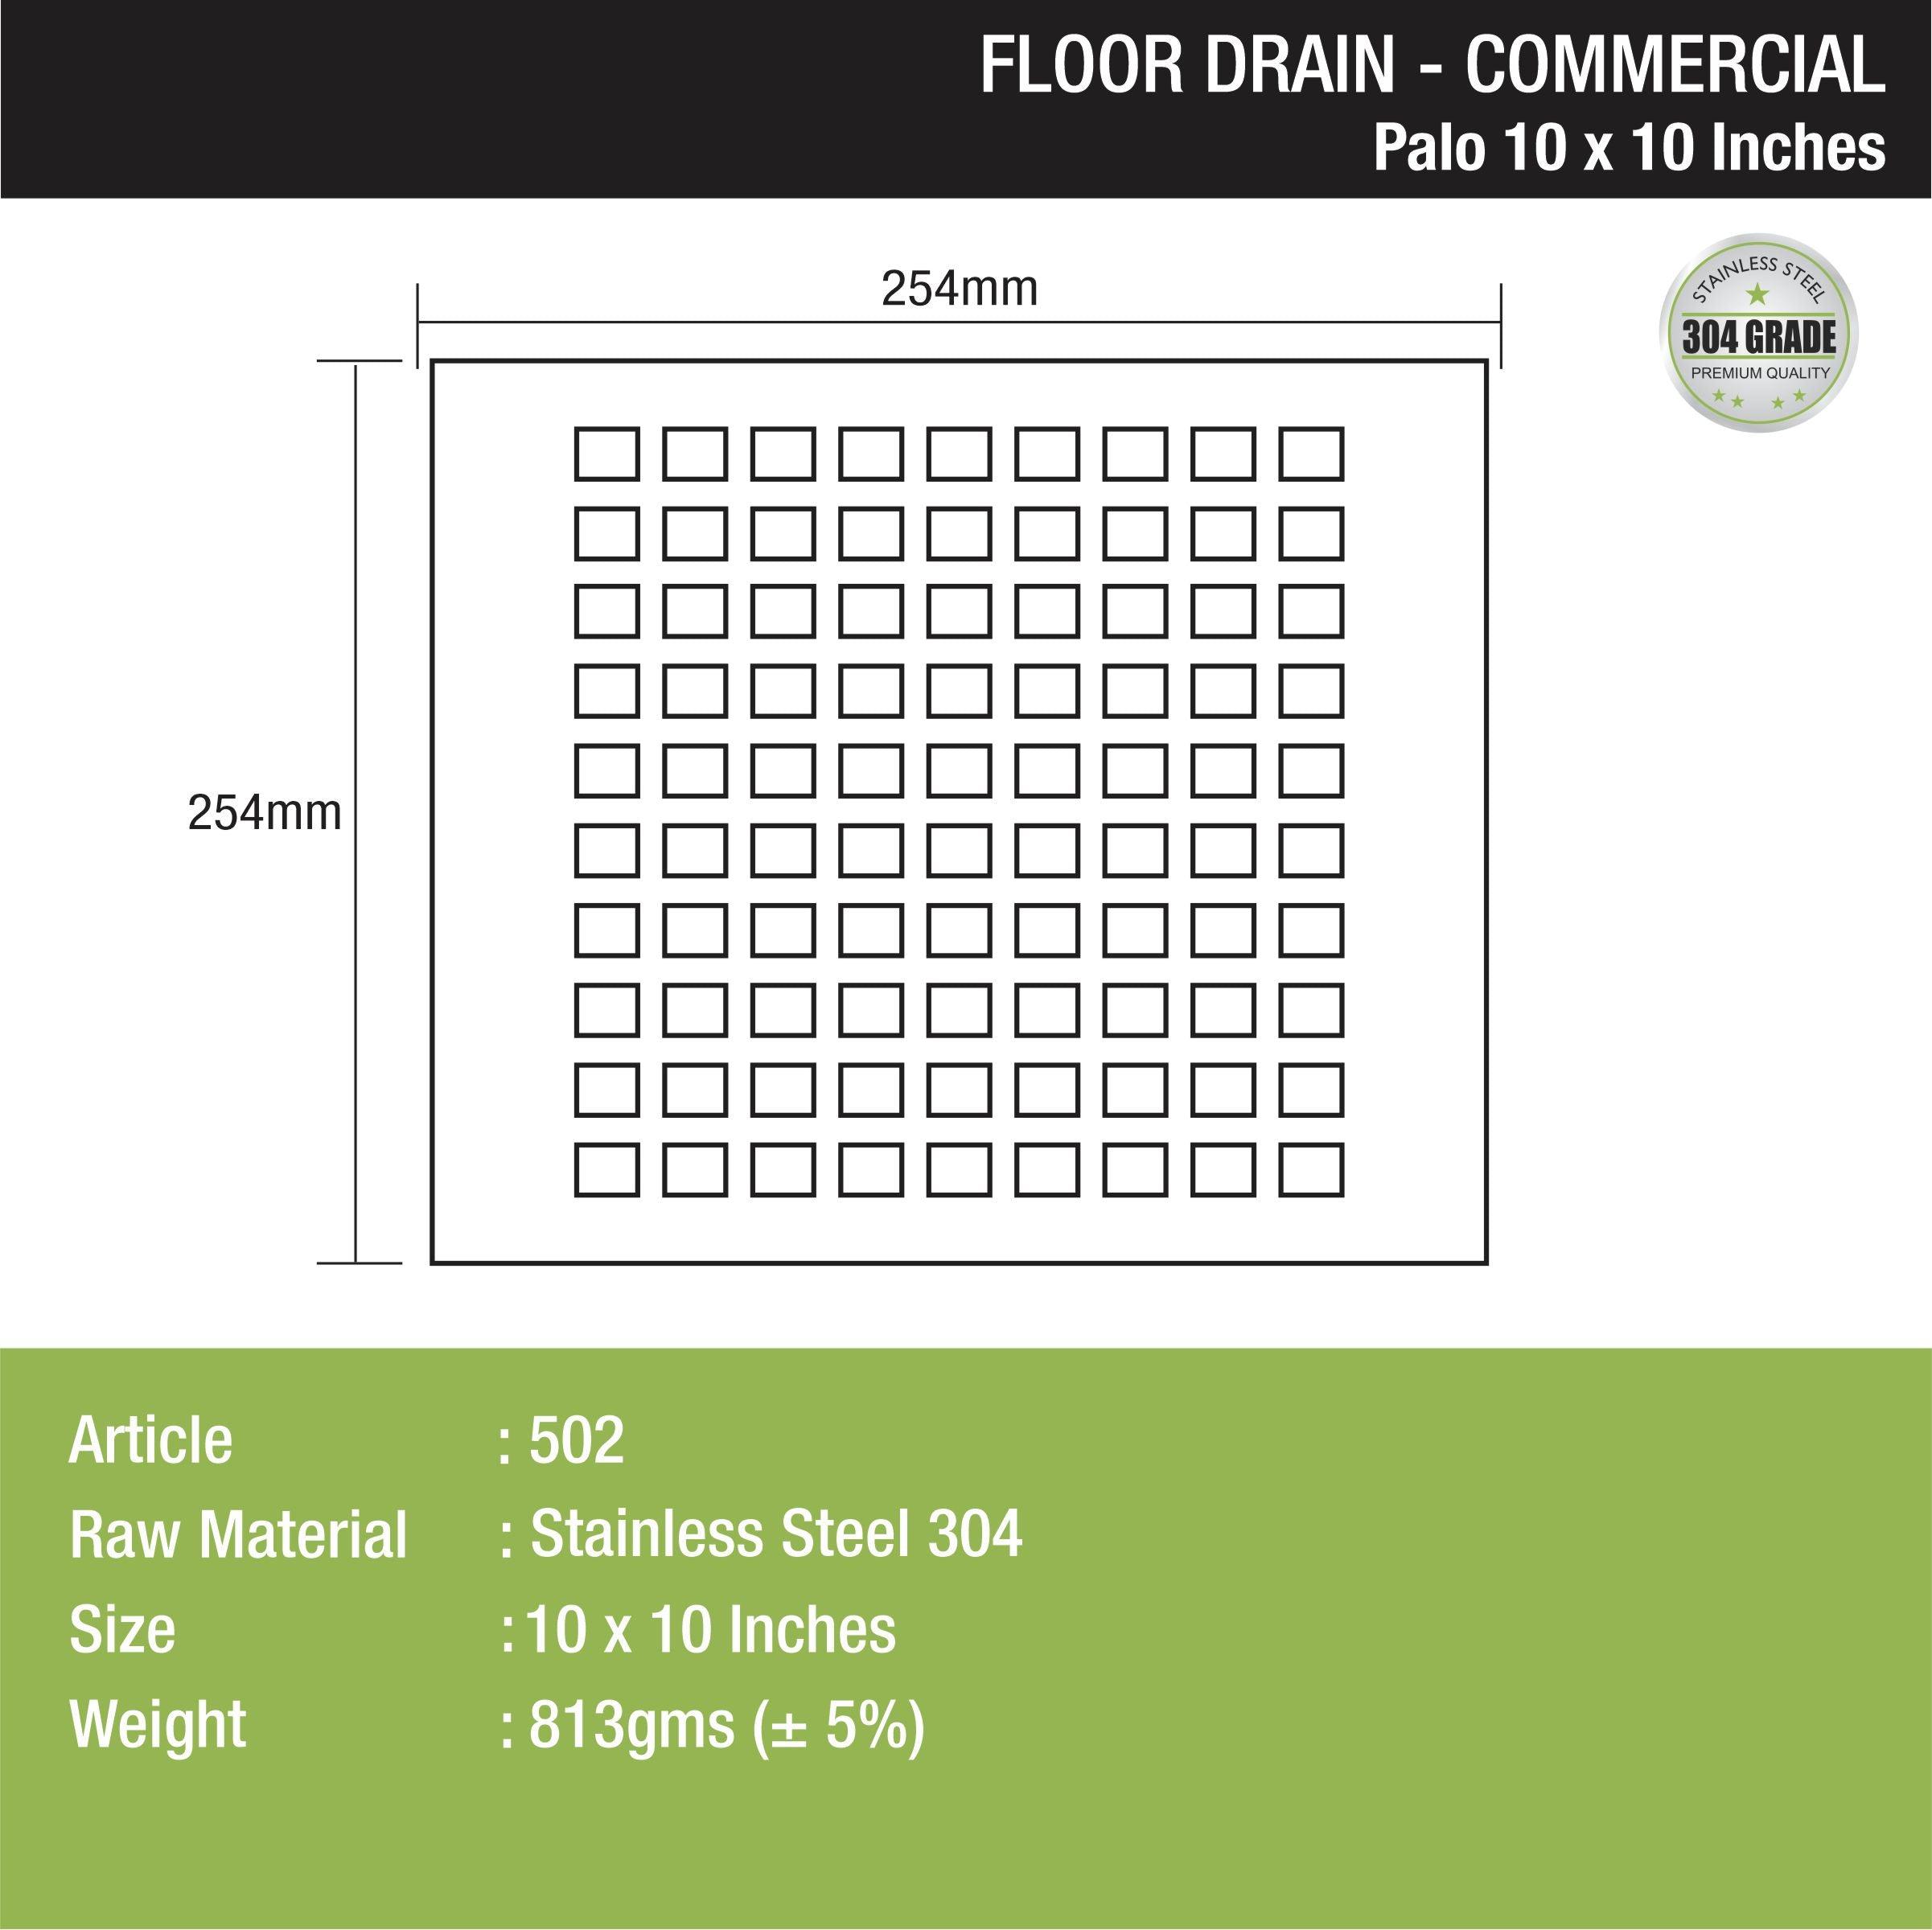 Palo Commercial Floor Drain (10 x 10 Inches) dimensions and sizes